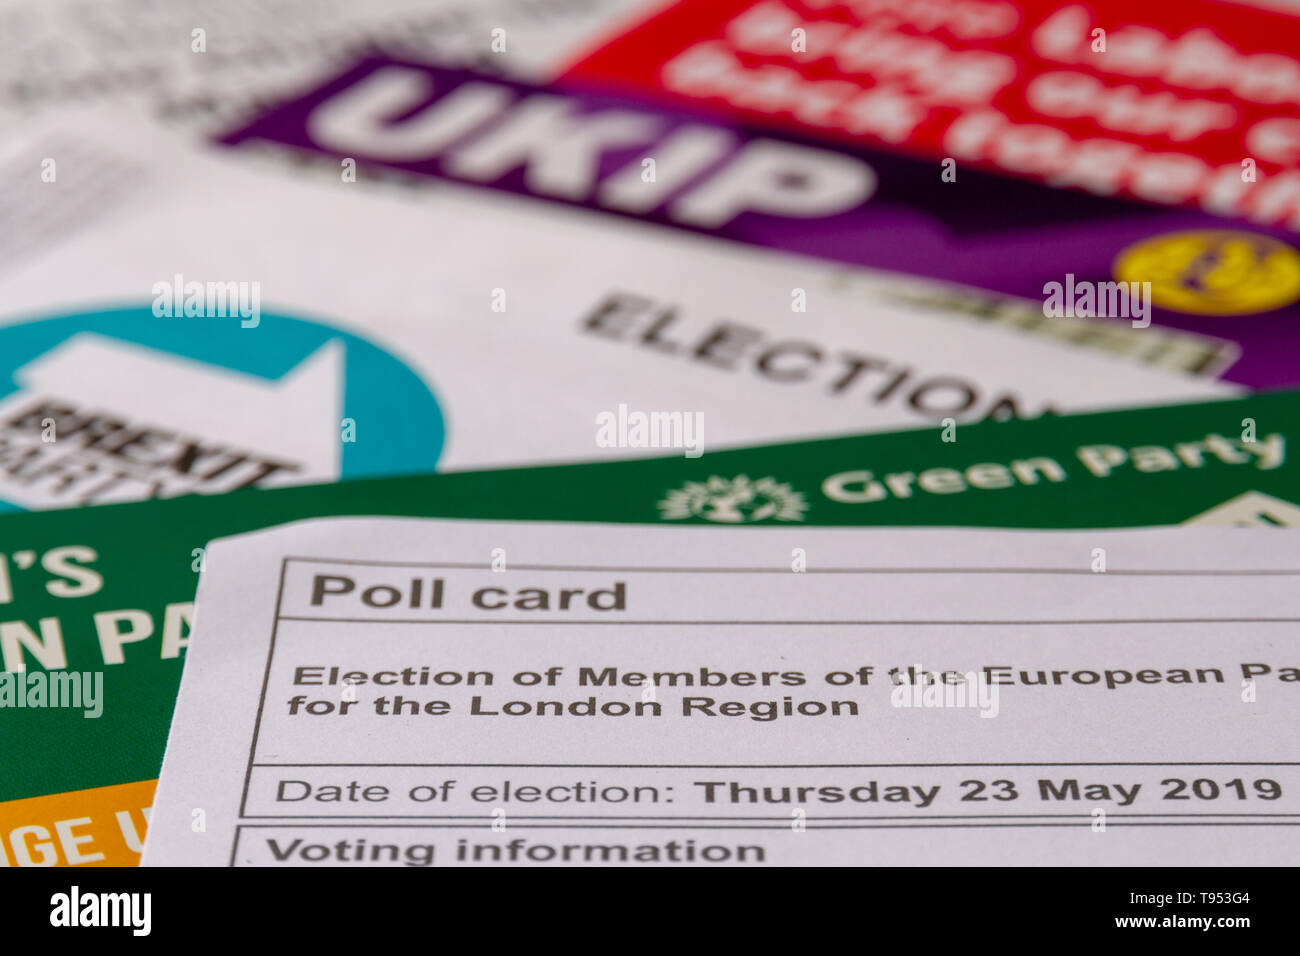 Close-up of polling card for European Parliament elections with election leaflets out of focus behind it Stock Photo